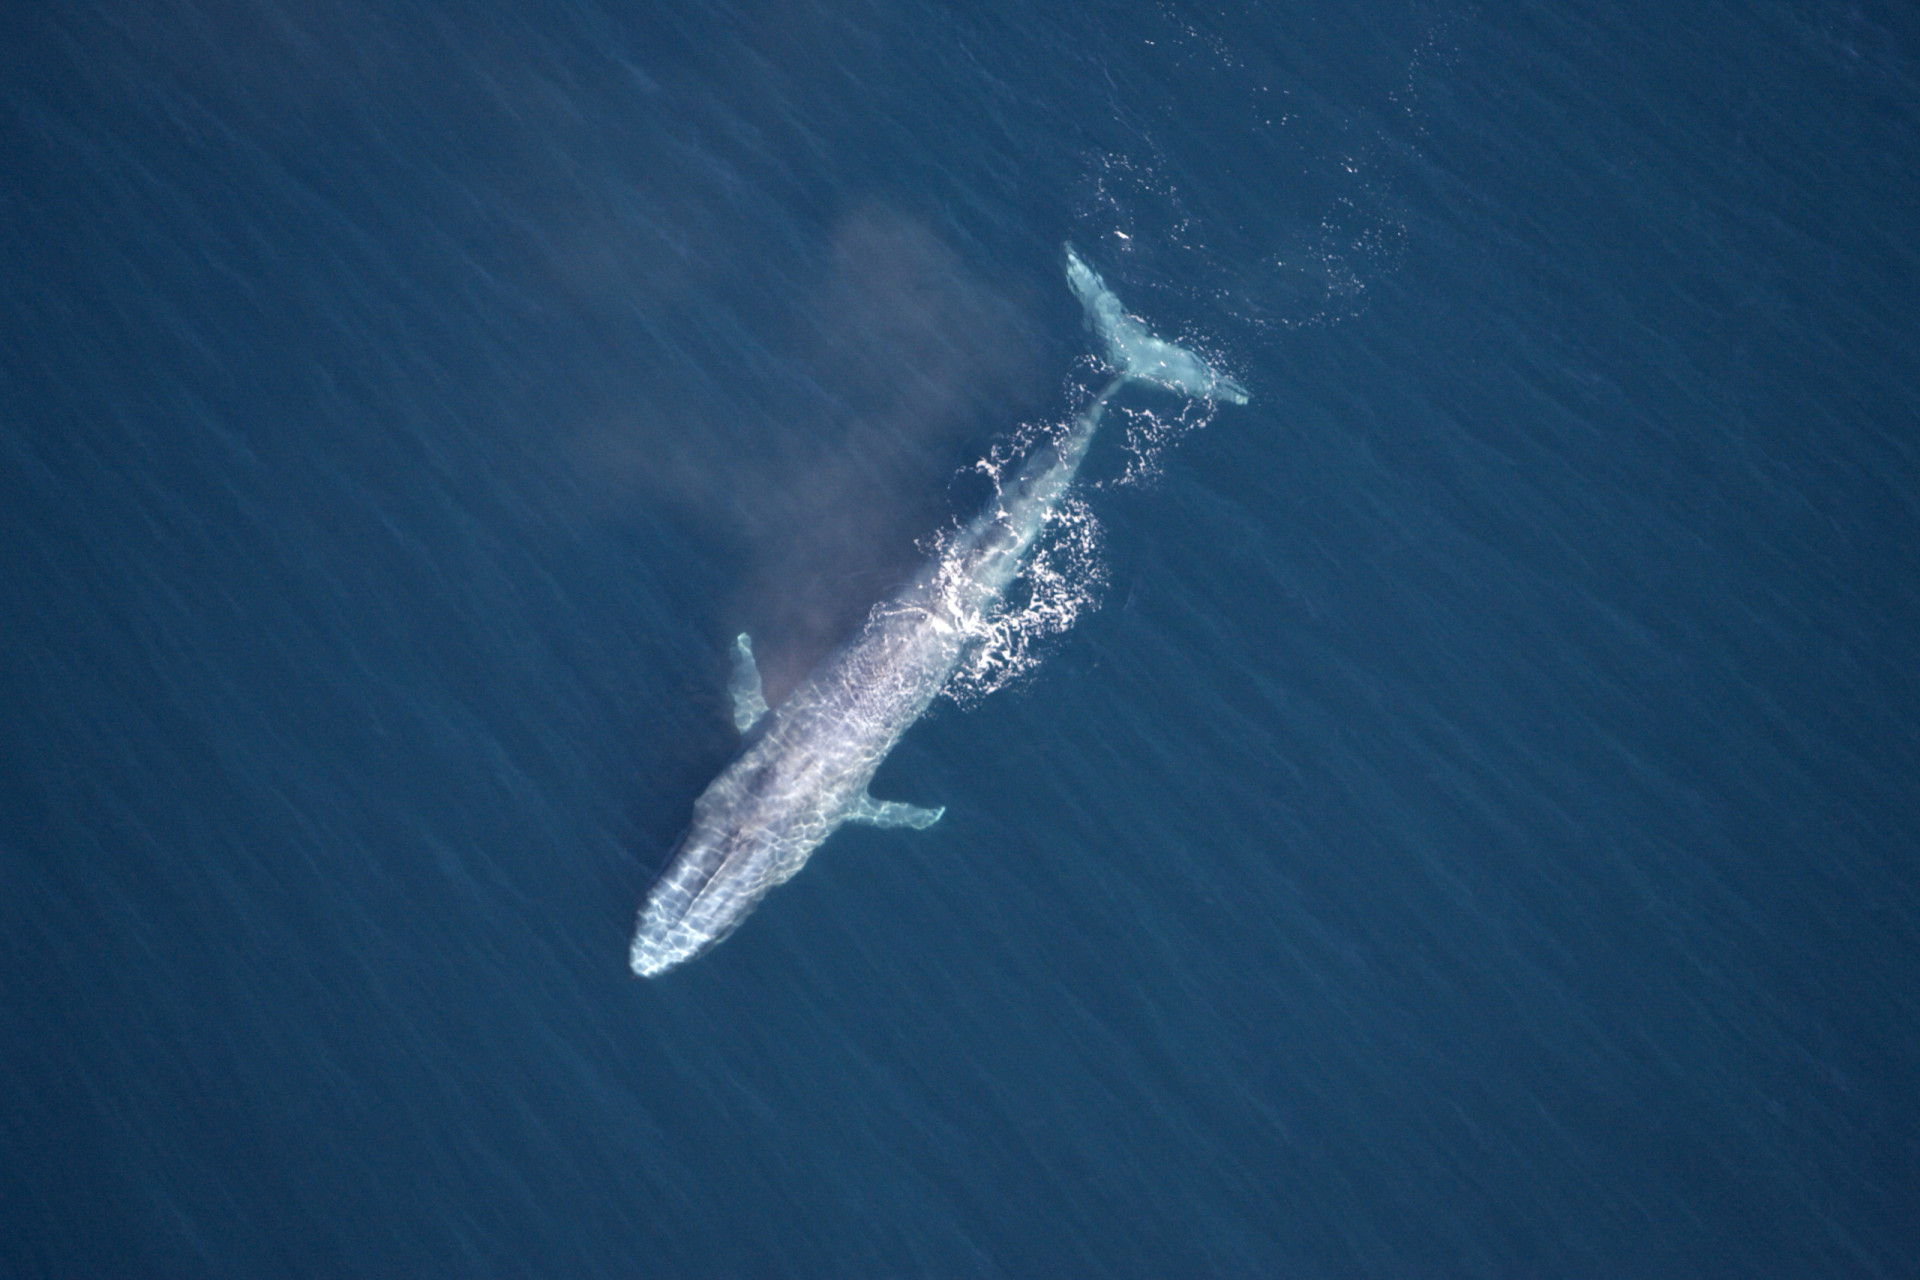 <p>Nothing says confidence like going after the biggest creature on Earth: blue whales. Orcas were recorded killing and eating blue whales in three separate attacks off the coast of Australia since 2019, according to a paper published in Marine Mammal Science.</p><p>You may also like:<a href="https://www.starsinsider.com/n/337337?utm_source=msn.com&utm_medium=display&utm_campaign=referral_description&utm_content=551403en-en_selected"> The funniest Chuck Norris jokes of all time</a></p>